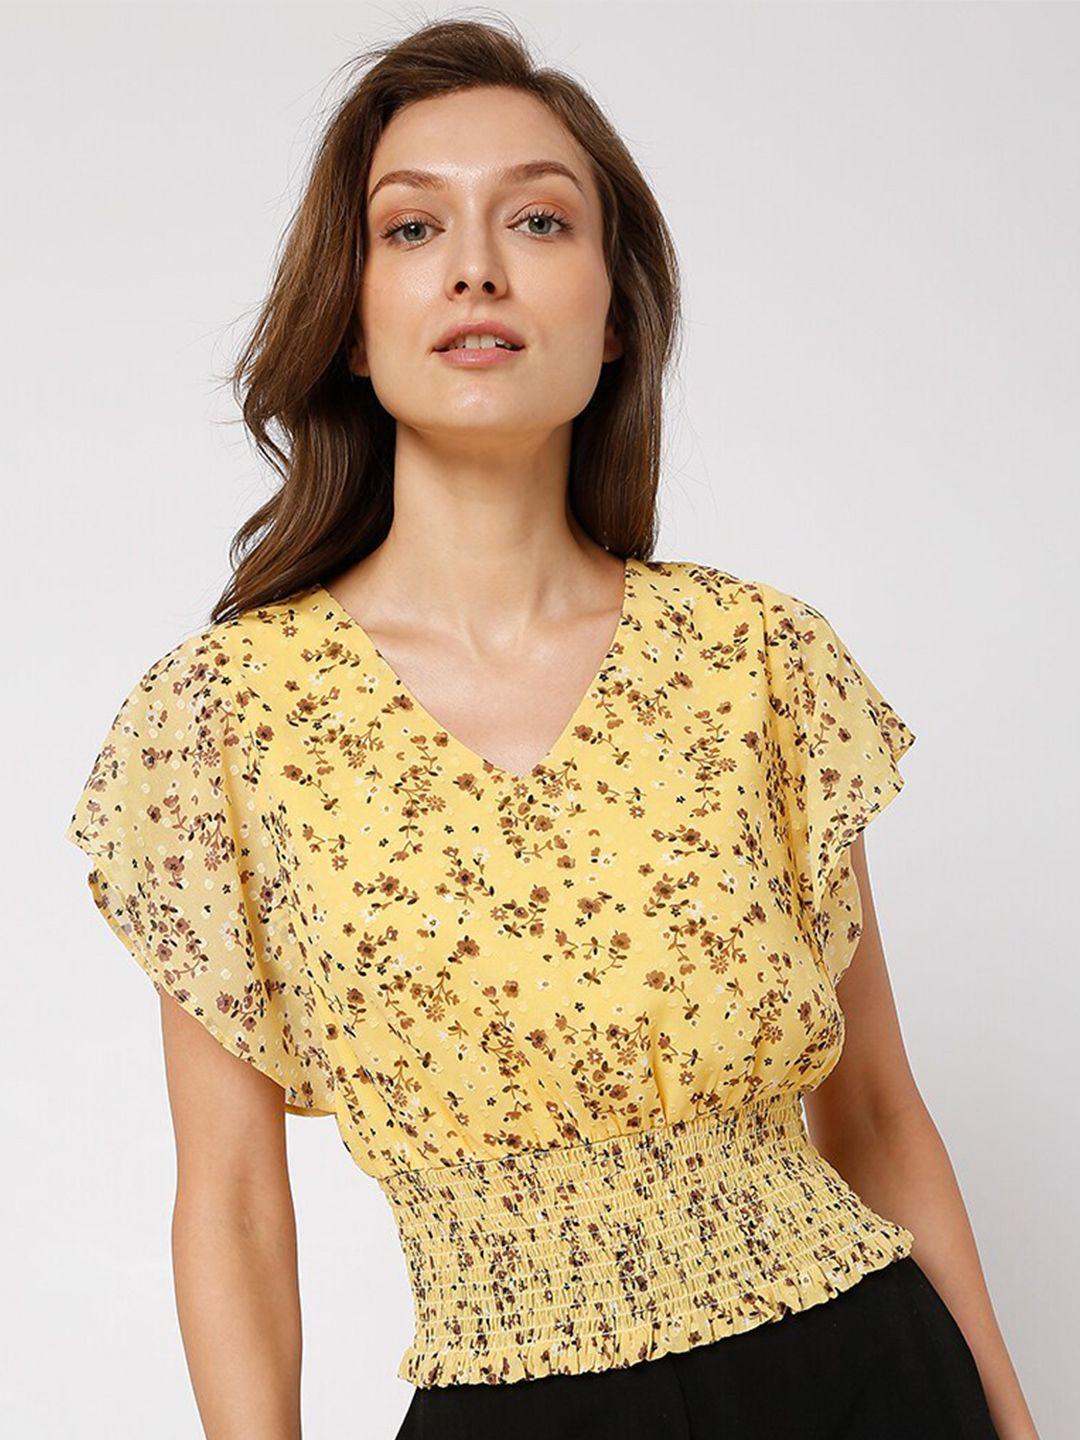 vero moda women gold-toned & brown floral print cinched waist top